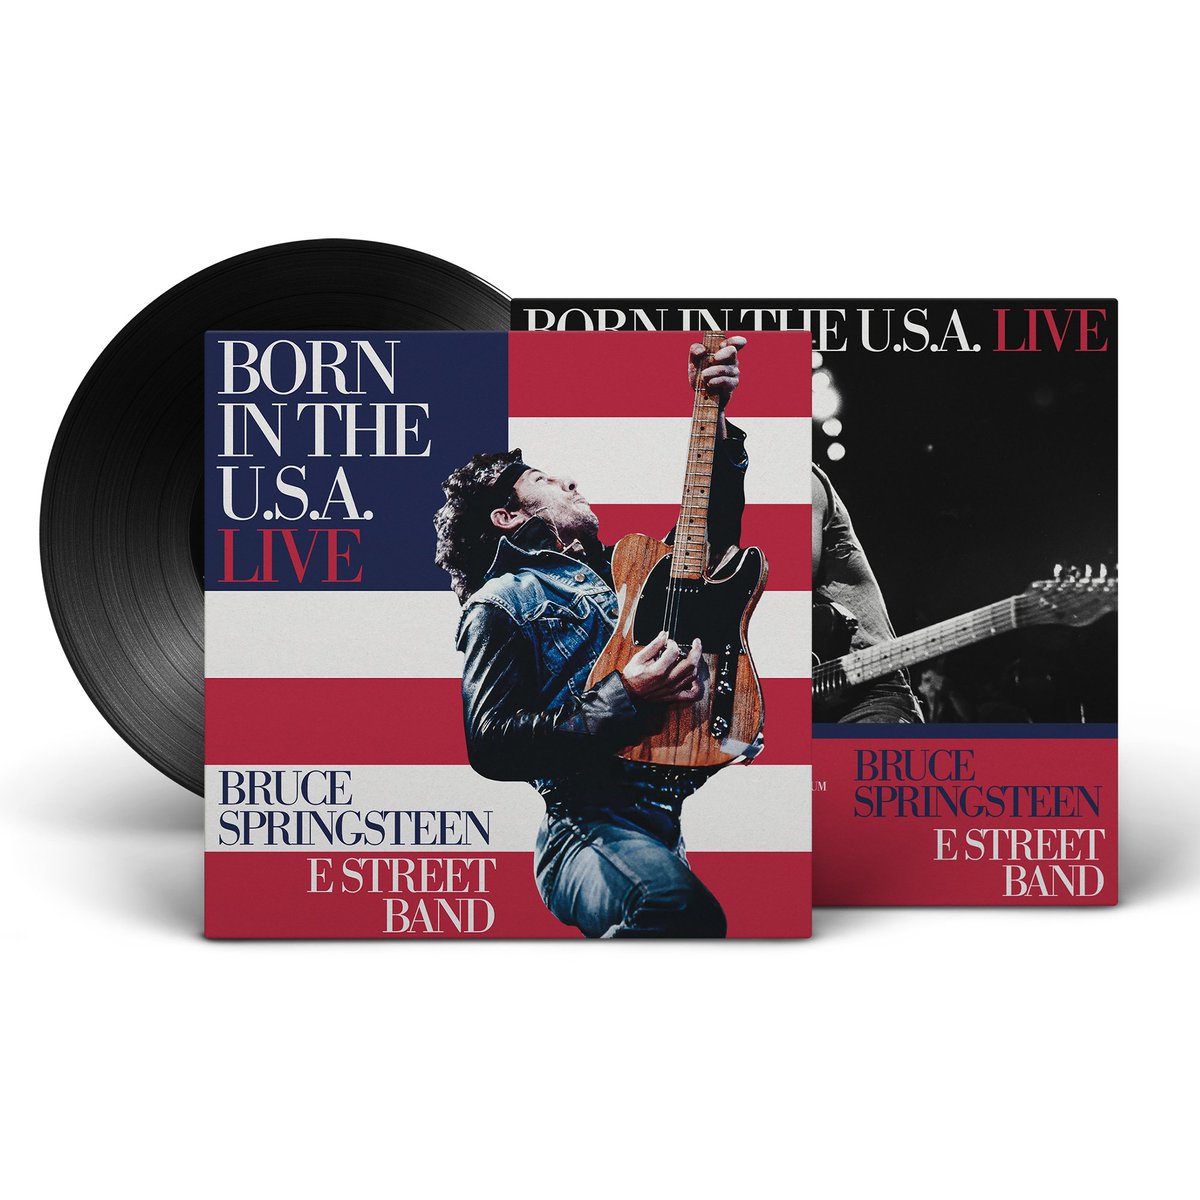 BORN IN THE U.S.A. LIVE 🇺🇲🏟️

Still high on the post-Springsteen excitement of last weekend, so here's a concept album cover for live renditions of all the songs from Born In The U.S.A

#brucespringsteen #bornintheusa #graphicdesign #concert #music #art #design #albumart